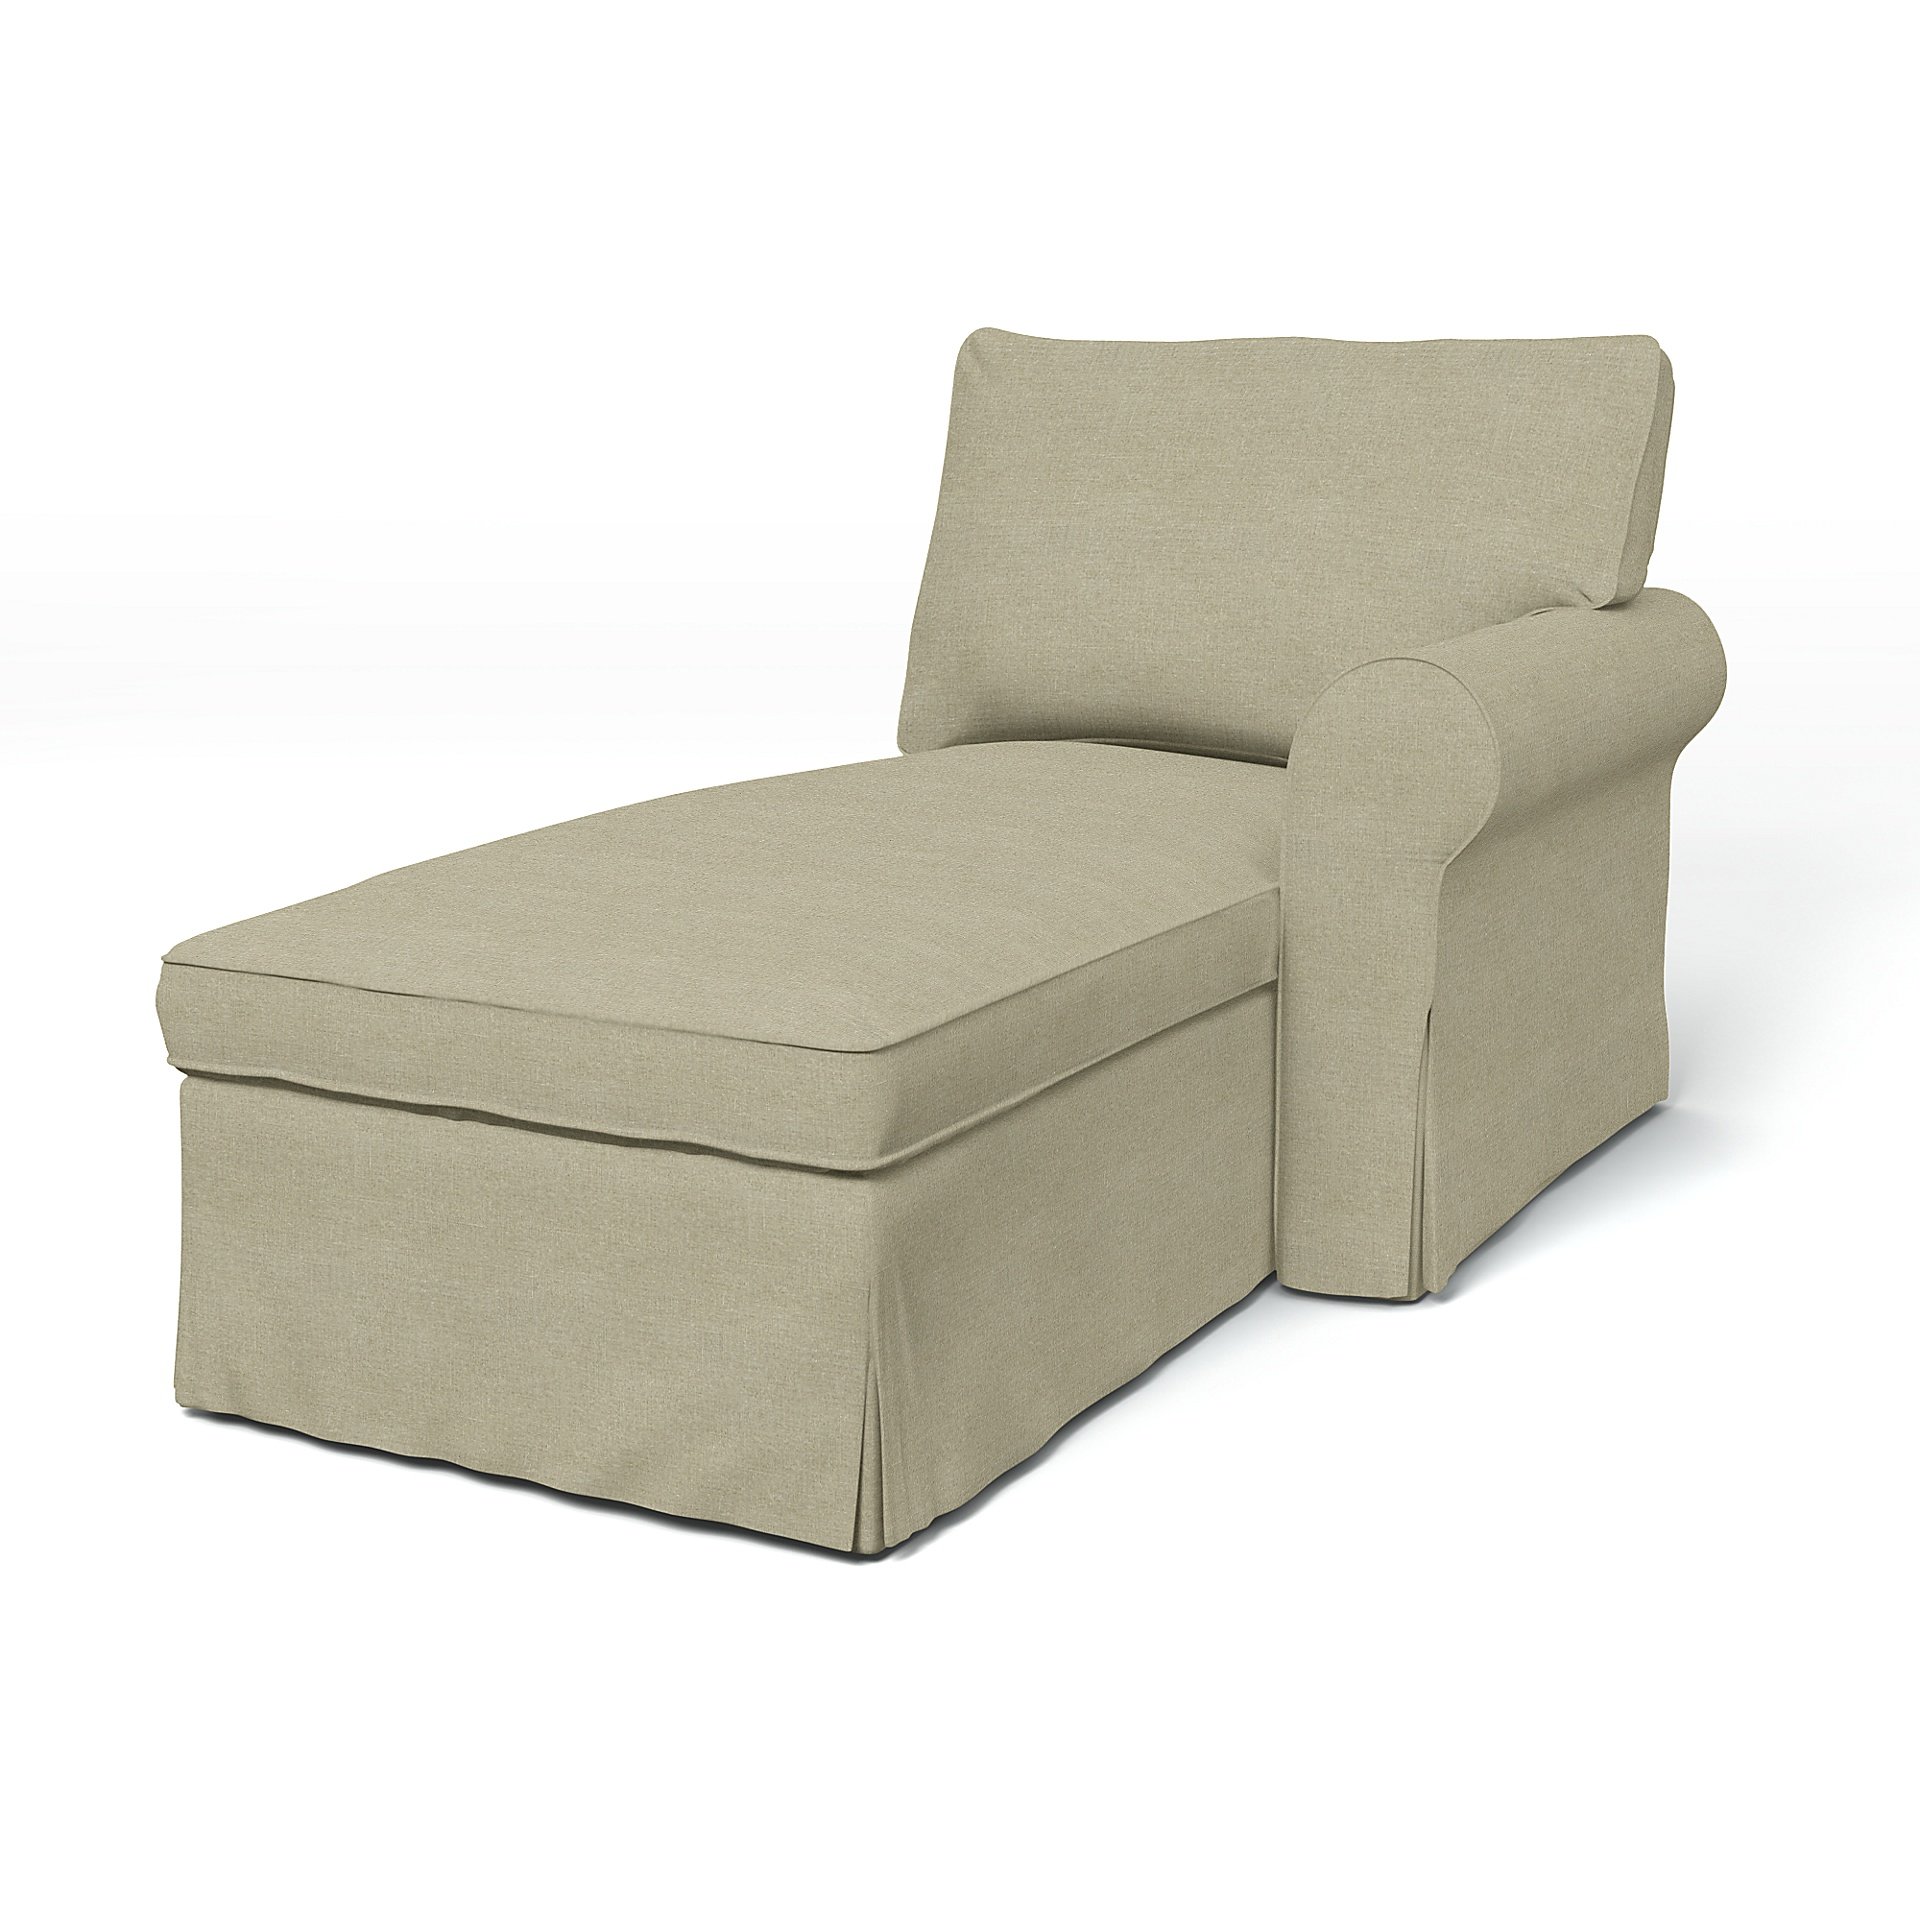 IKEA - Ektorp Chaise with Right Armrest Cover, Pebble, Linen - Bemz